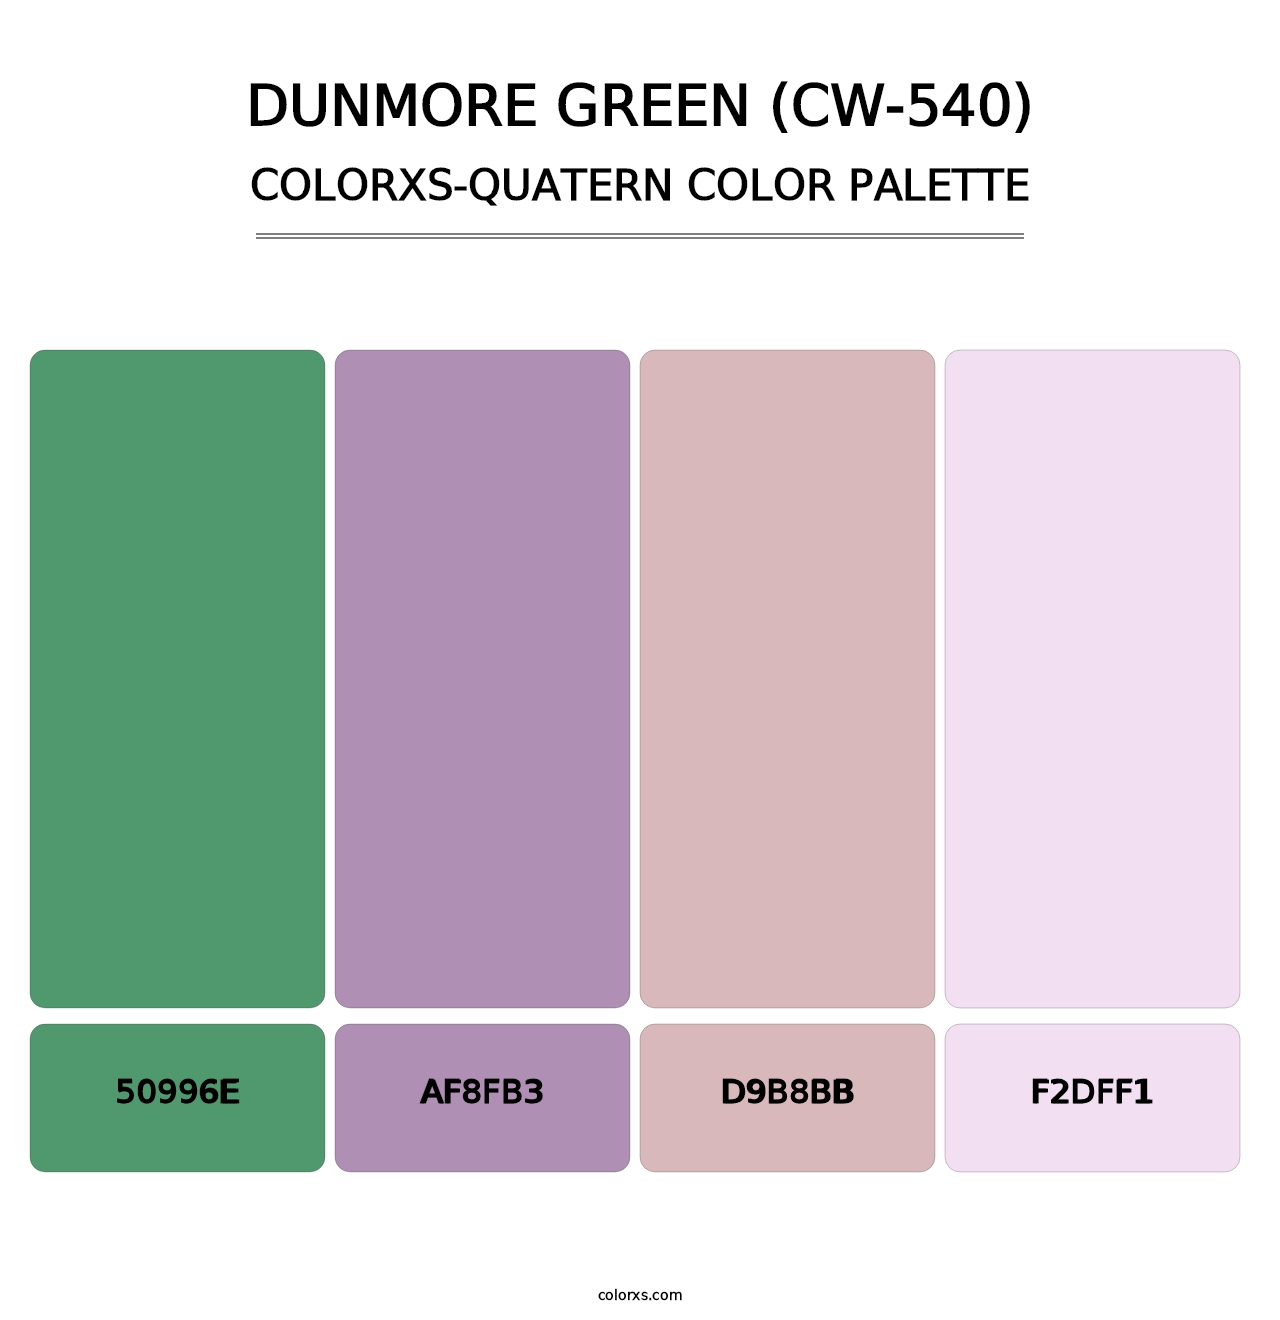 Dunmore Green (CW-540) - Colorxs Quatern Palette